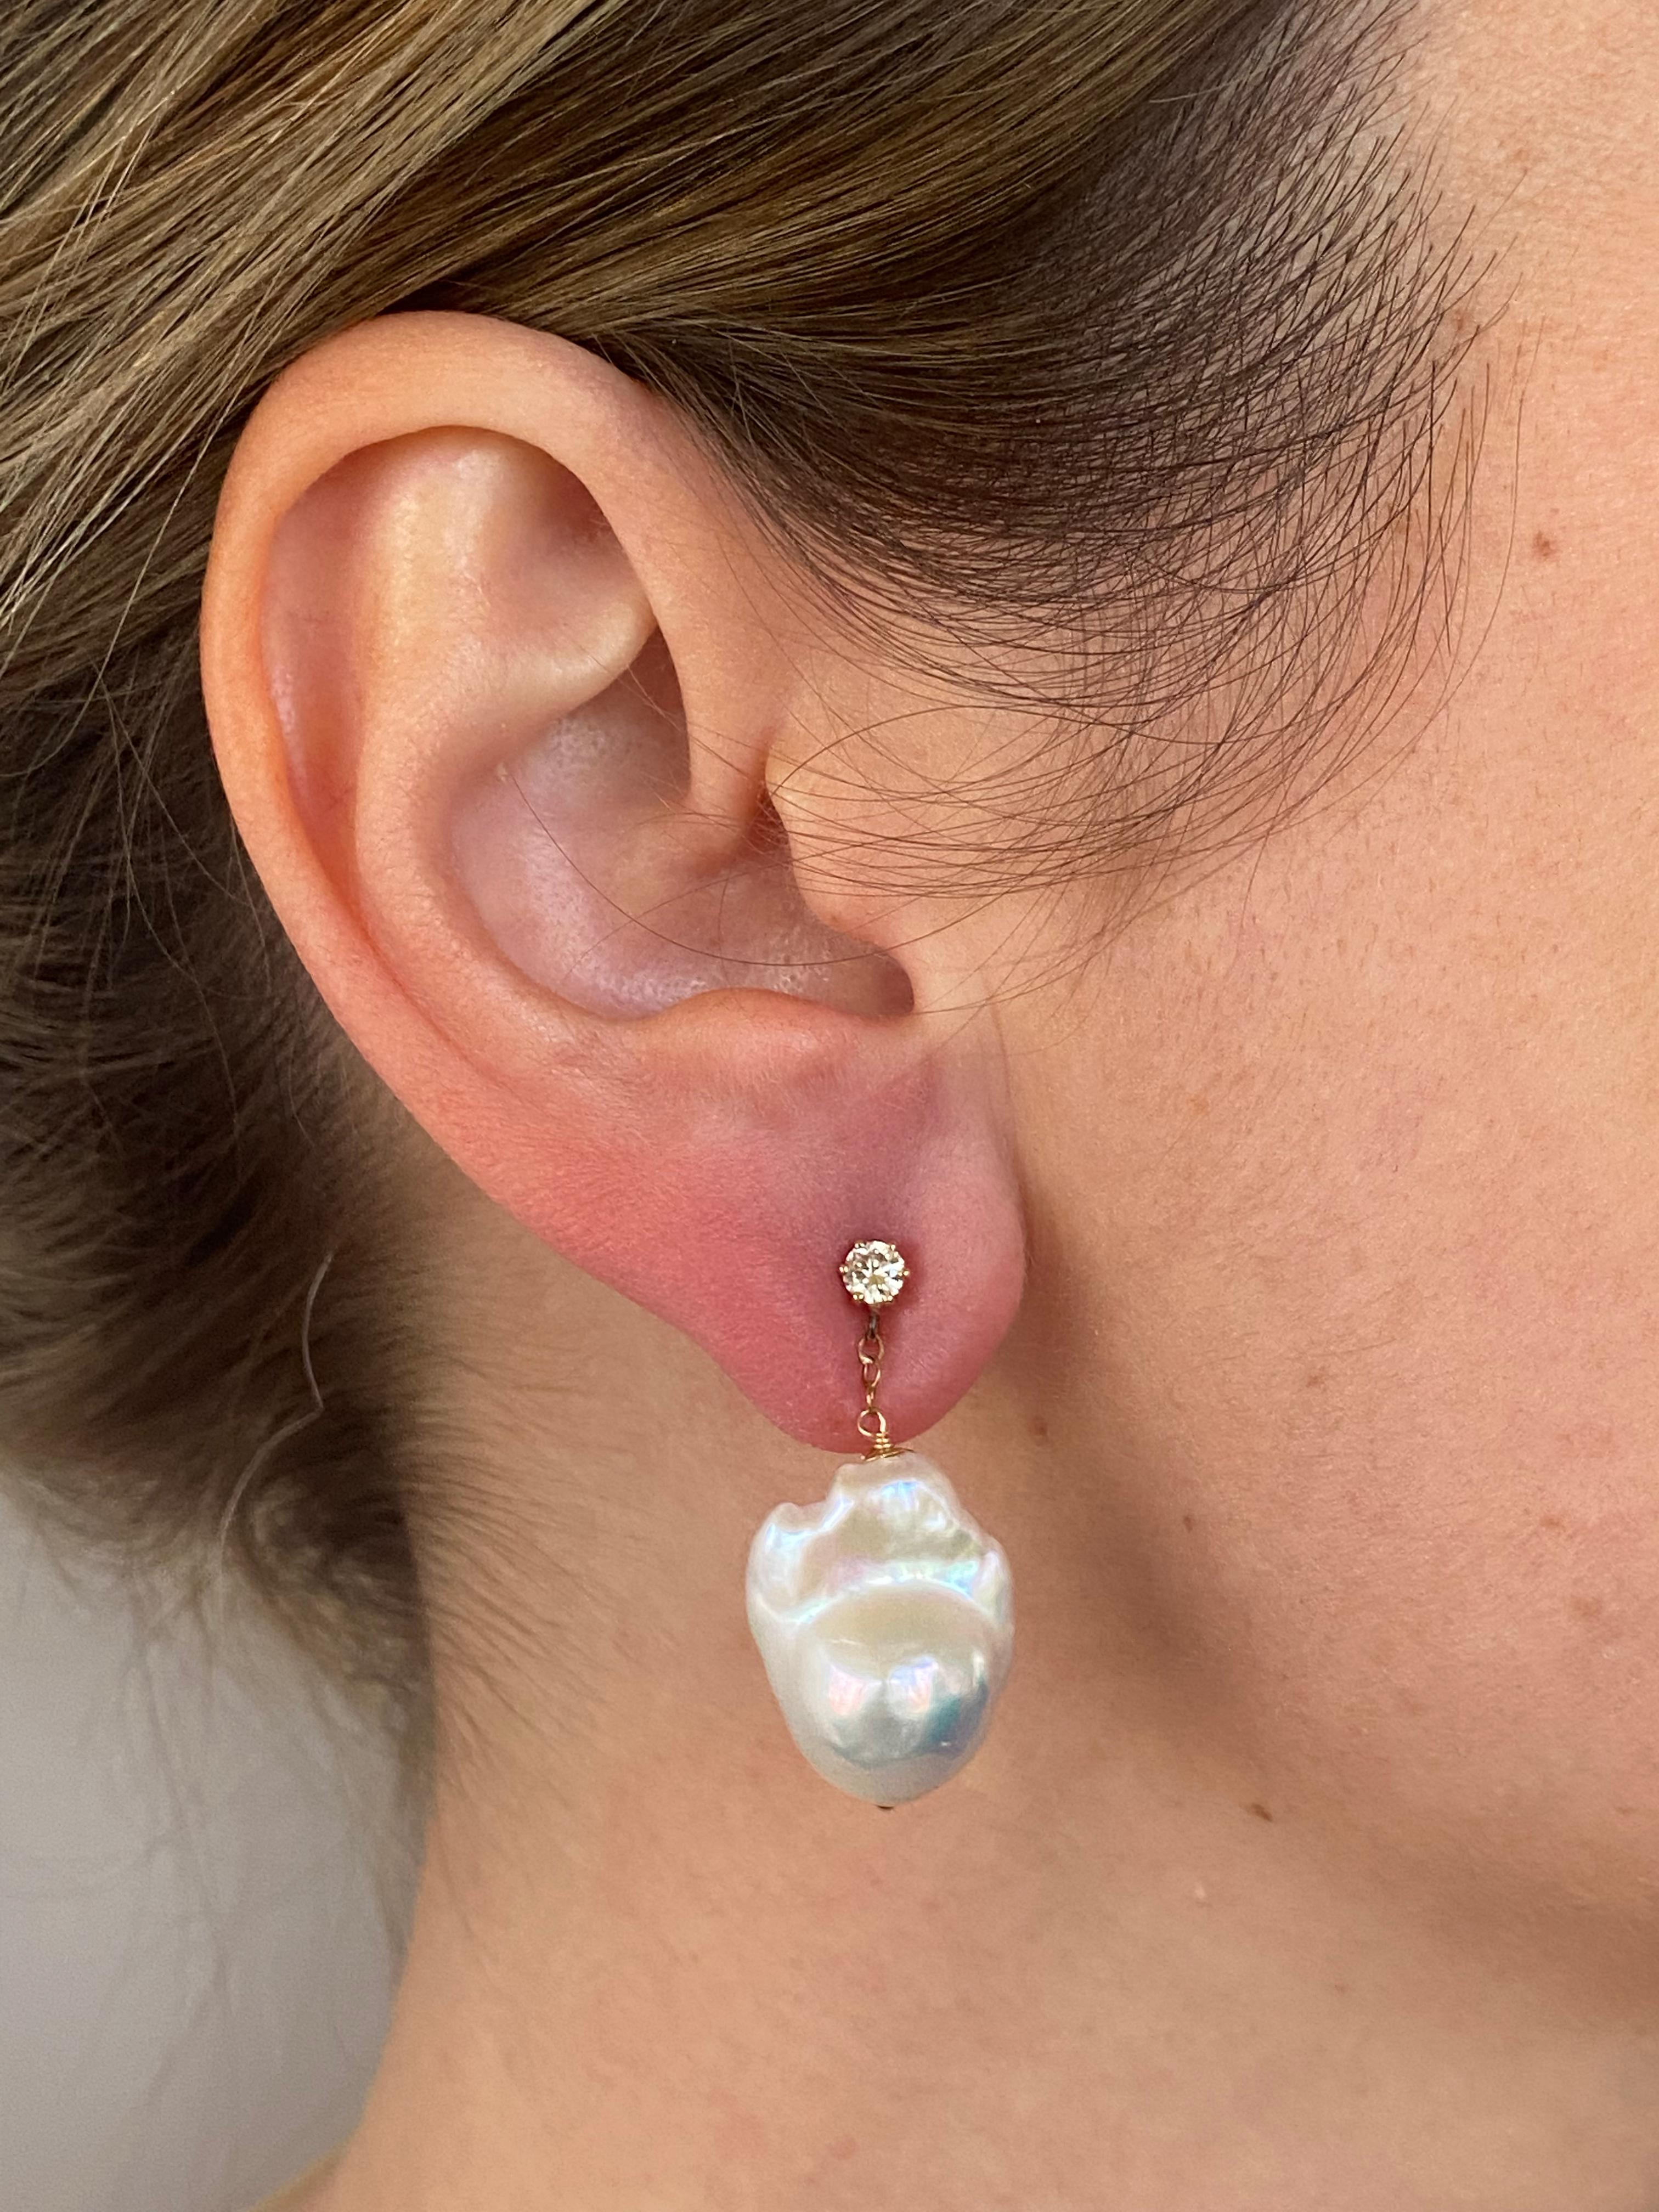 Artisan Marina J. Diamond Studded Pearl Earrings with 14k Solid Gold For Sale